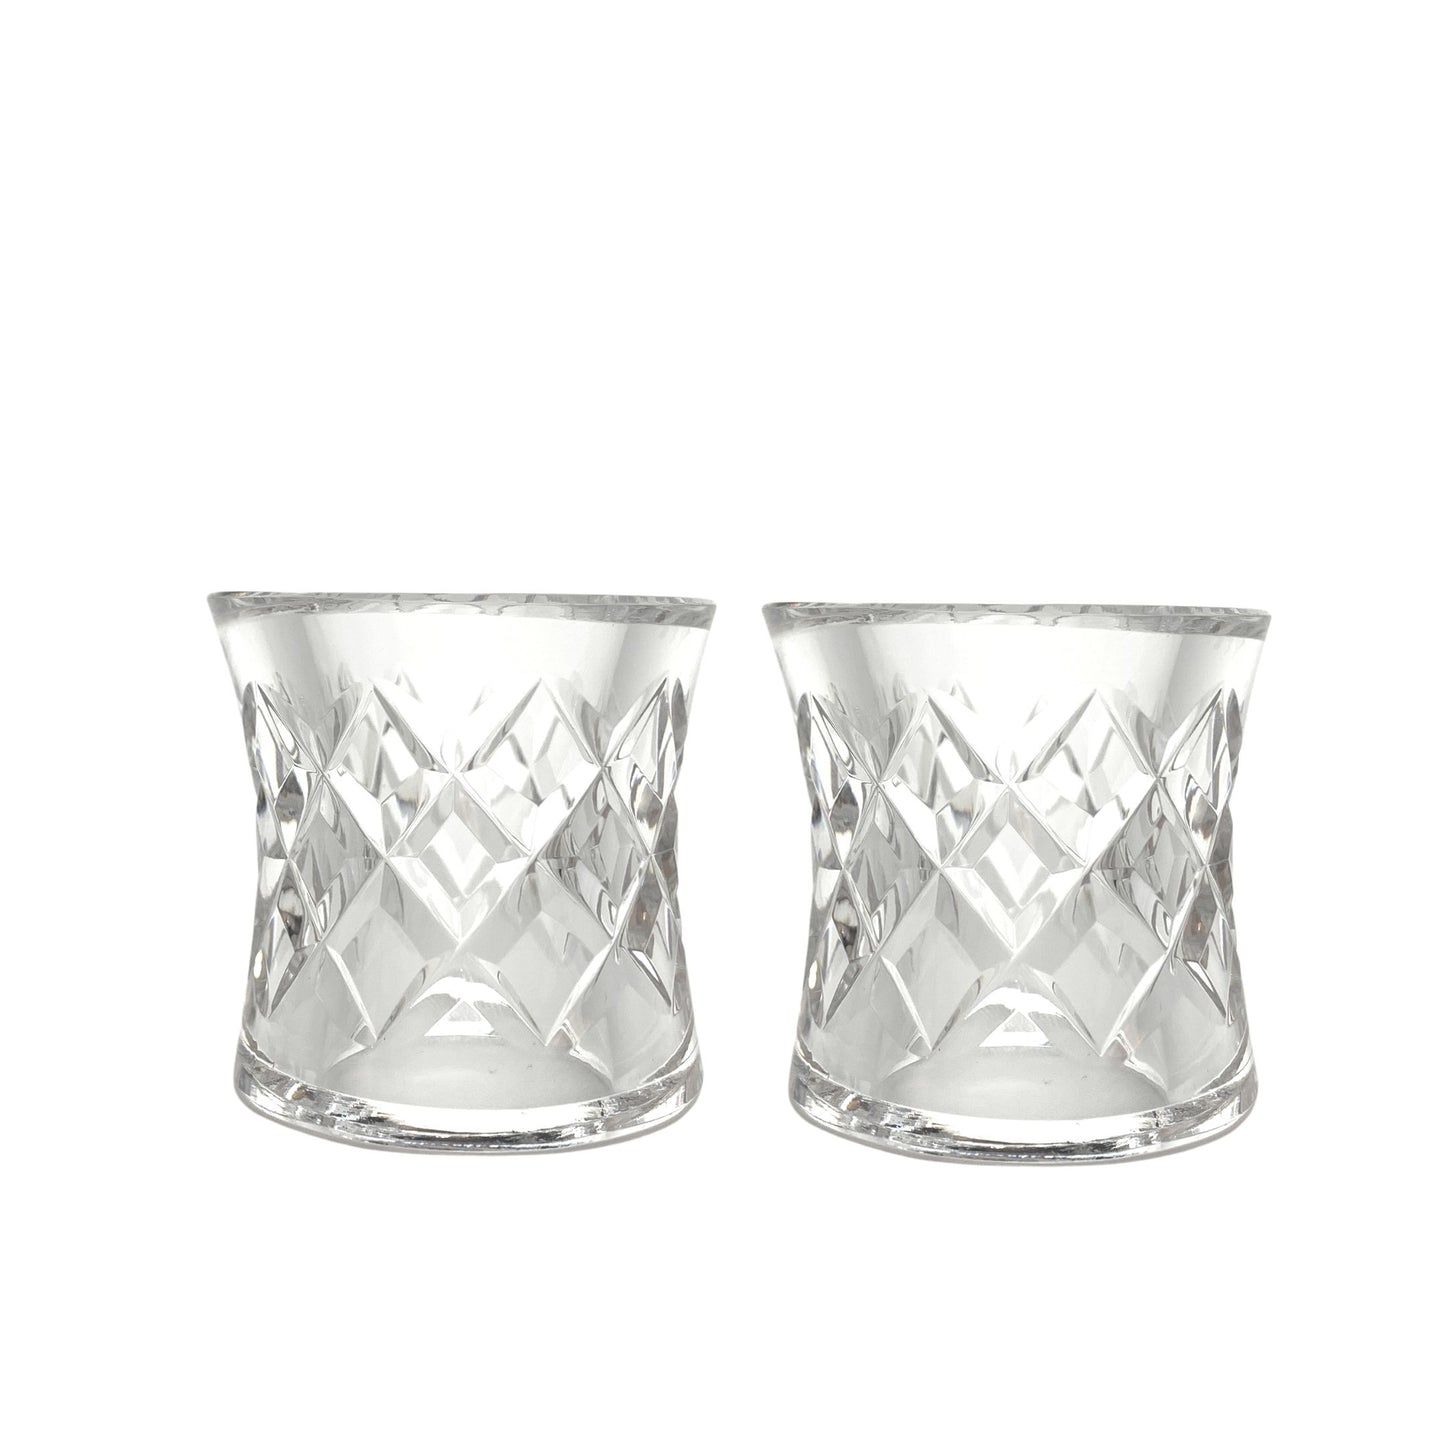 Waterford Comeragh Rare Thick Crystal Napkin Rings (2)